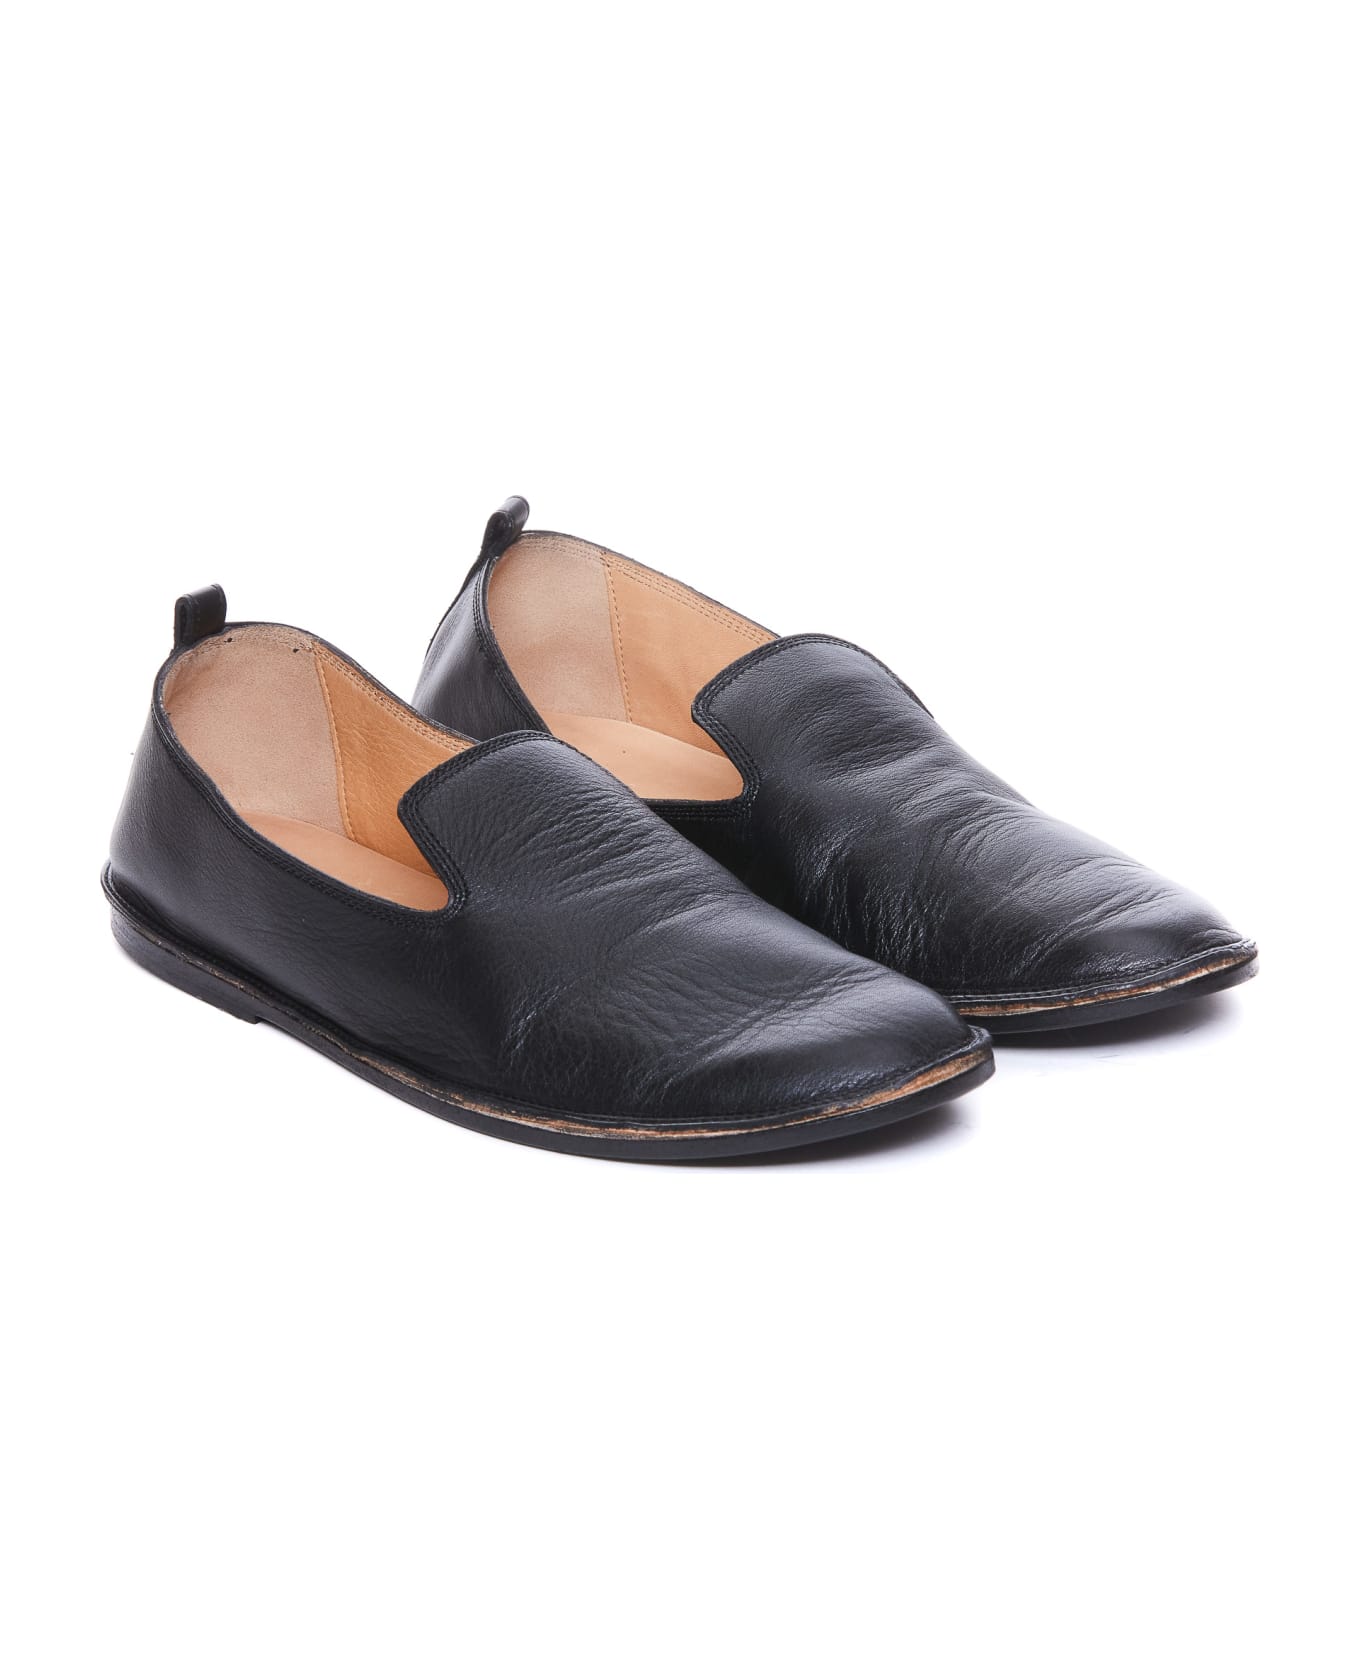 Marsell Strasacco Slippers - Black